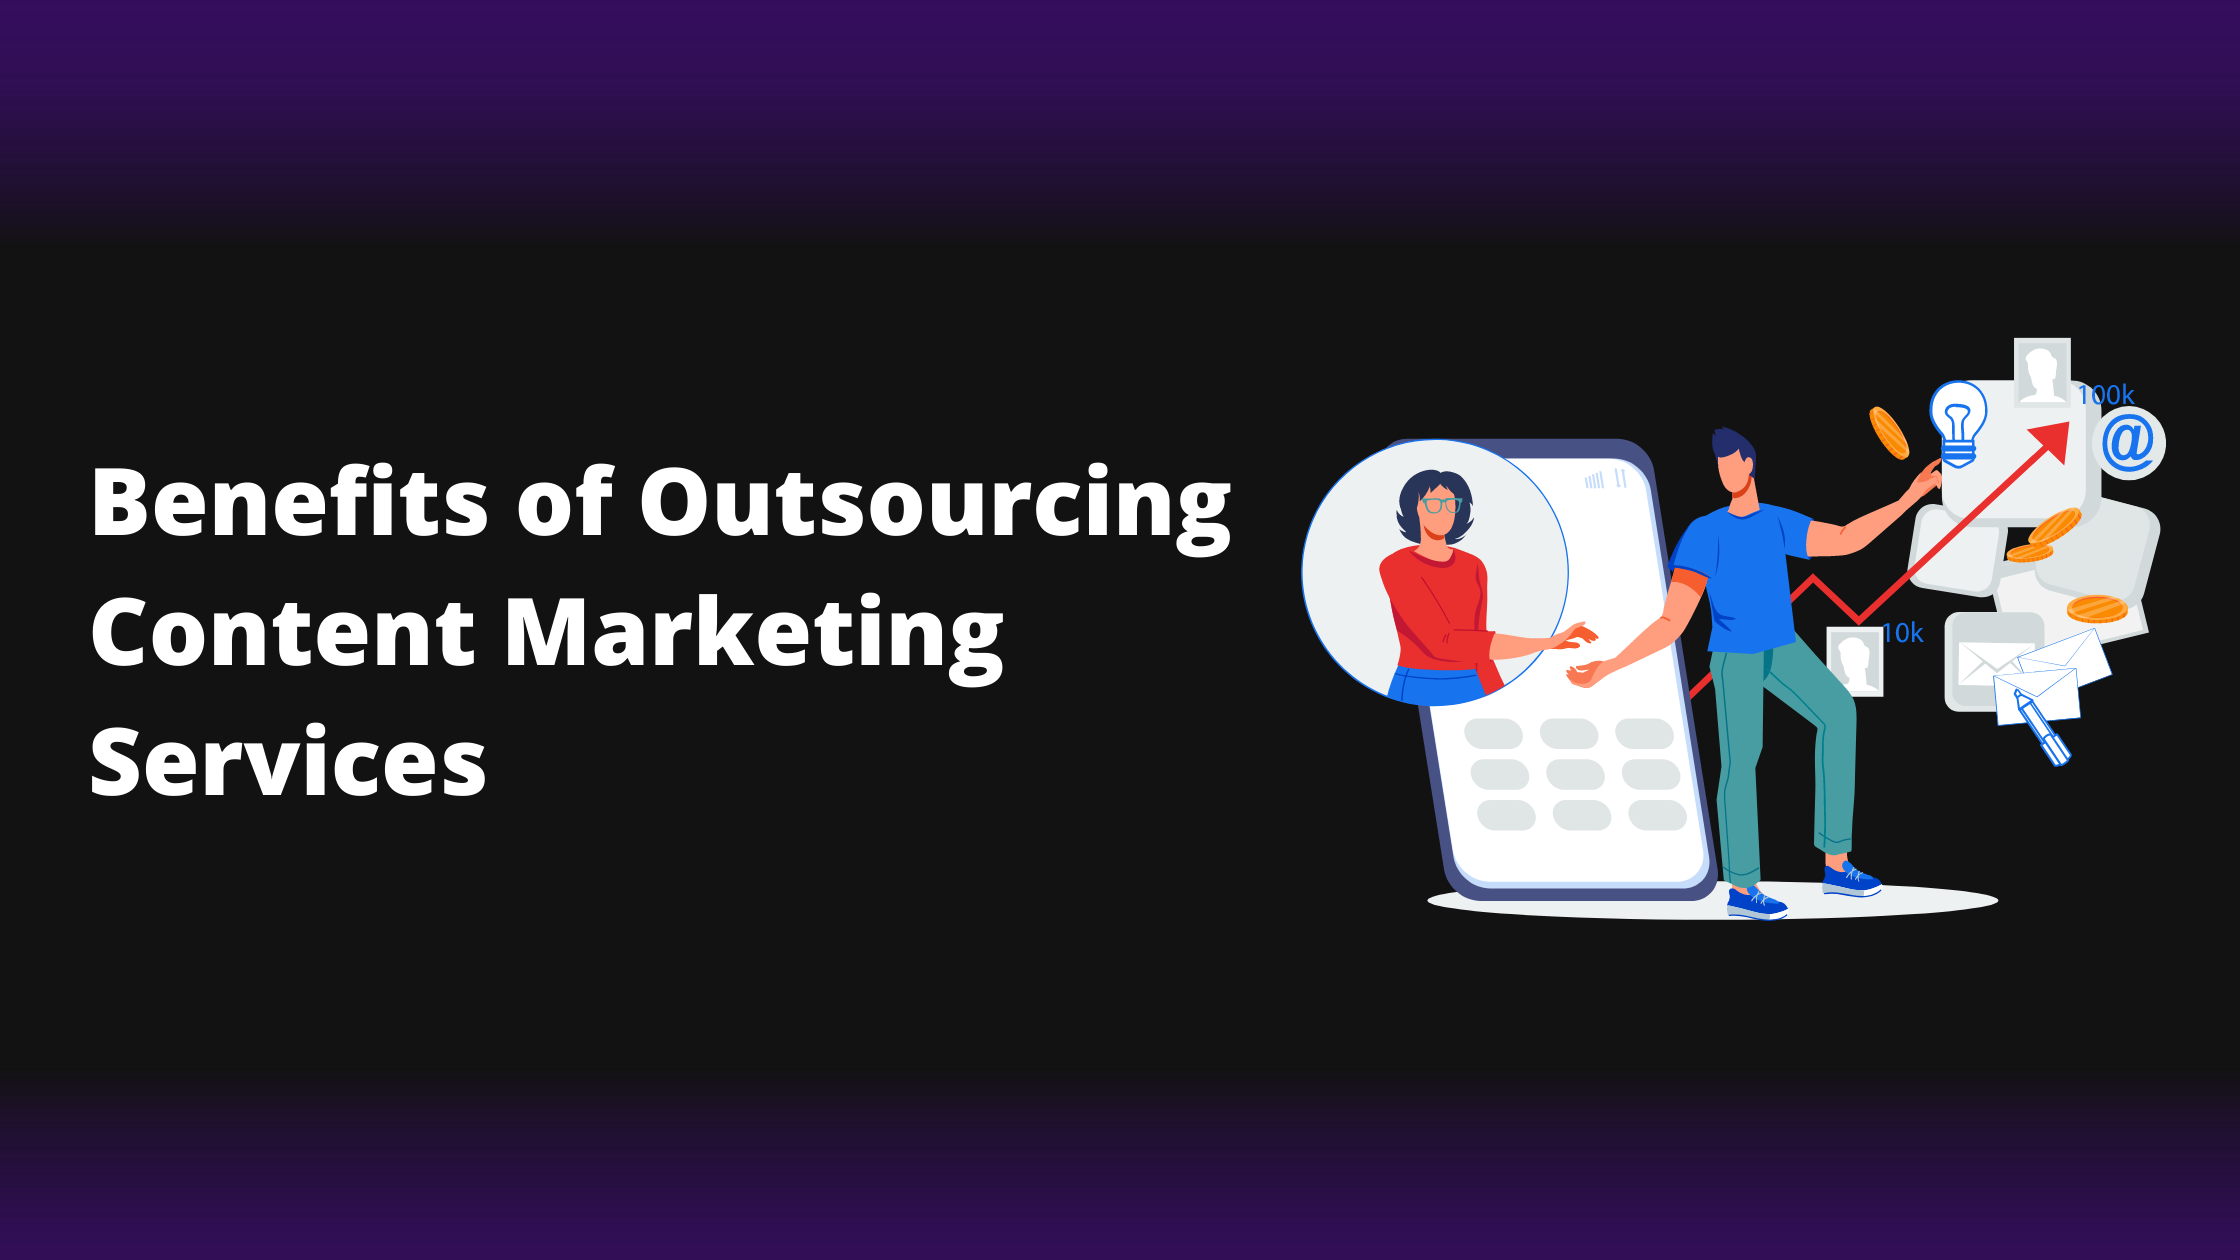 Benefits of Outsourcing Content Marketing Services